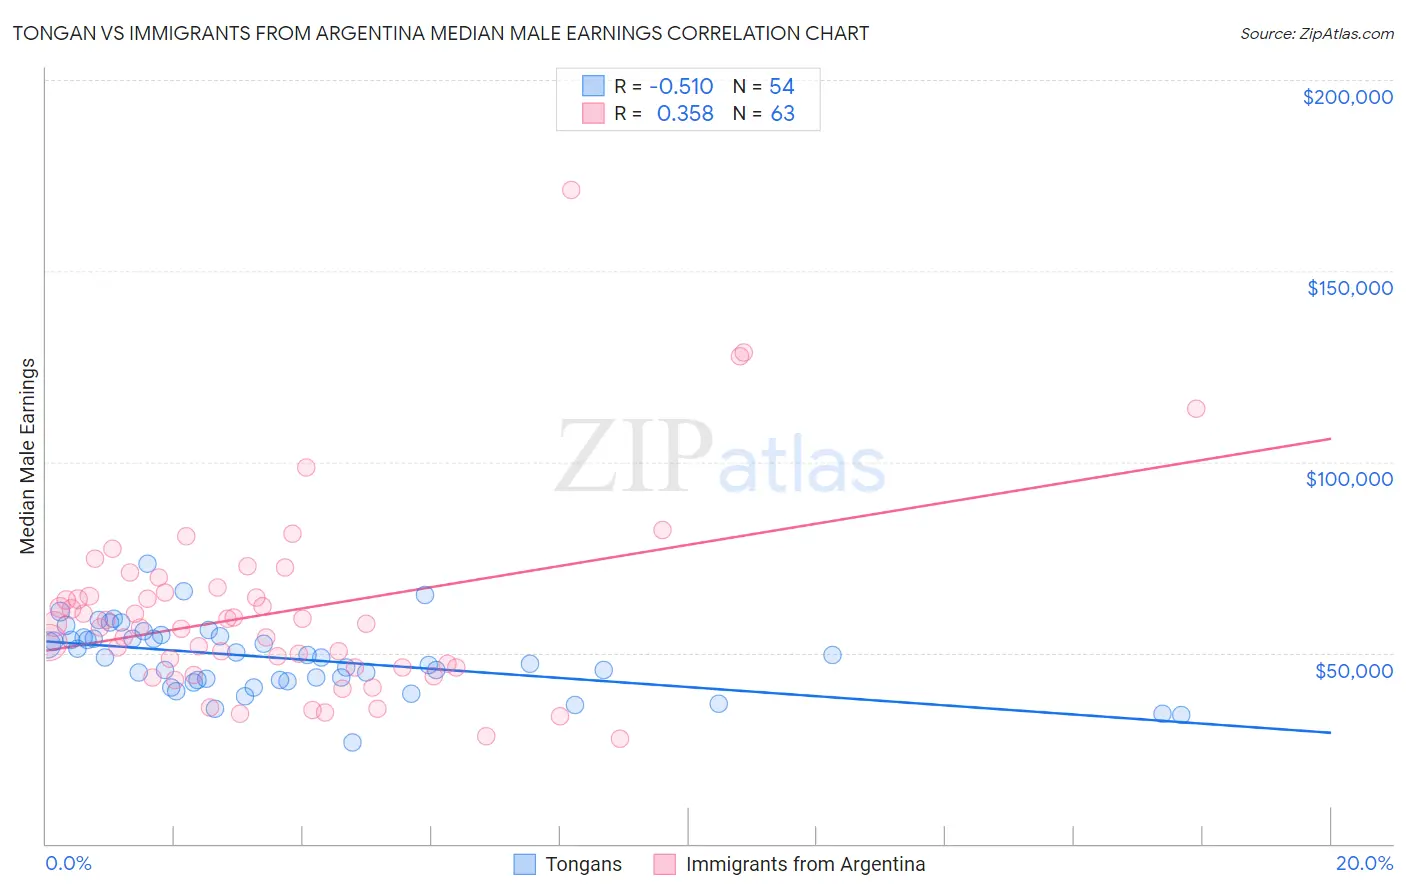 Tongan vs Immigrants from Argentina Median Male Earnings